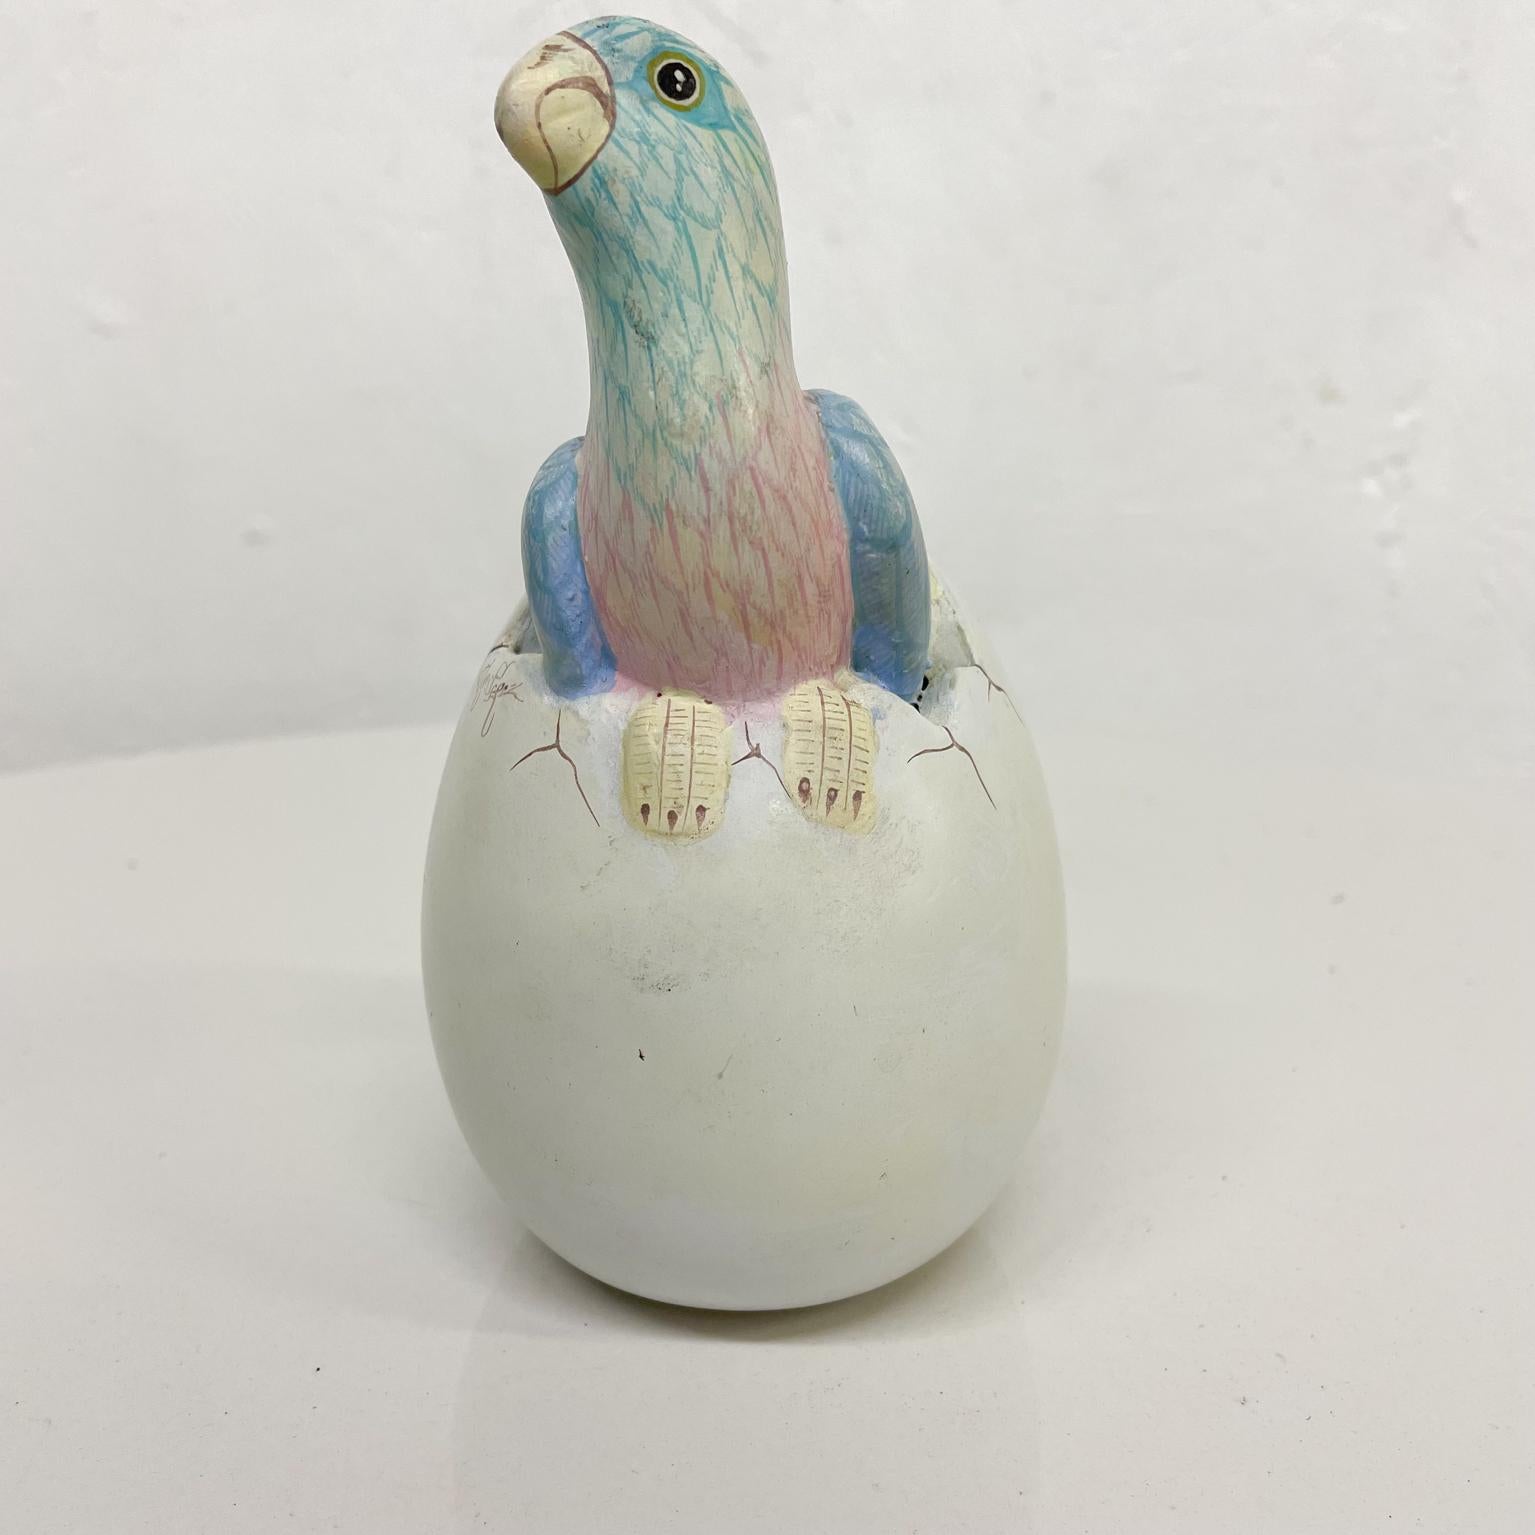 Mexican Pretty Parrot Egg Hatching Ceramic Art Sculpture Mexico Sergio Bustamante 1980s